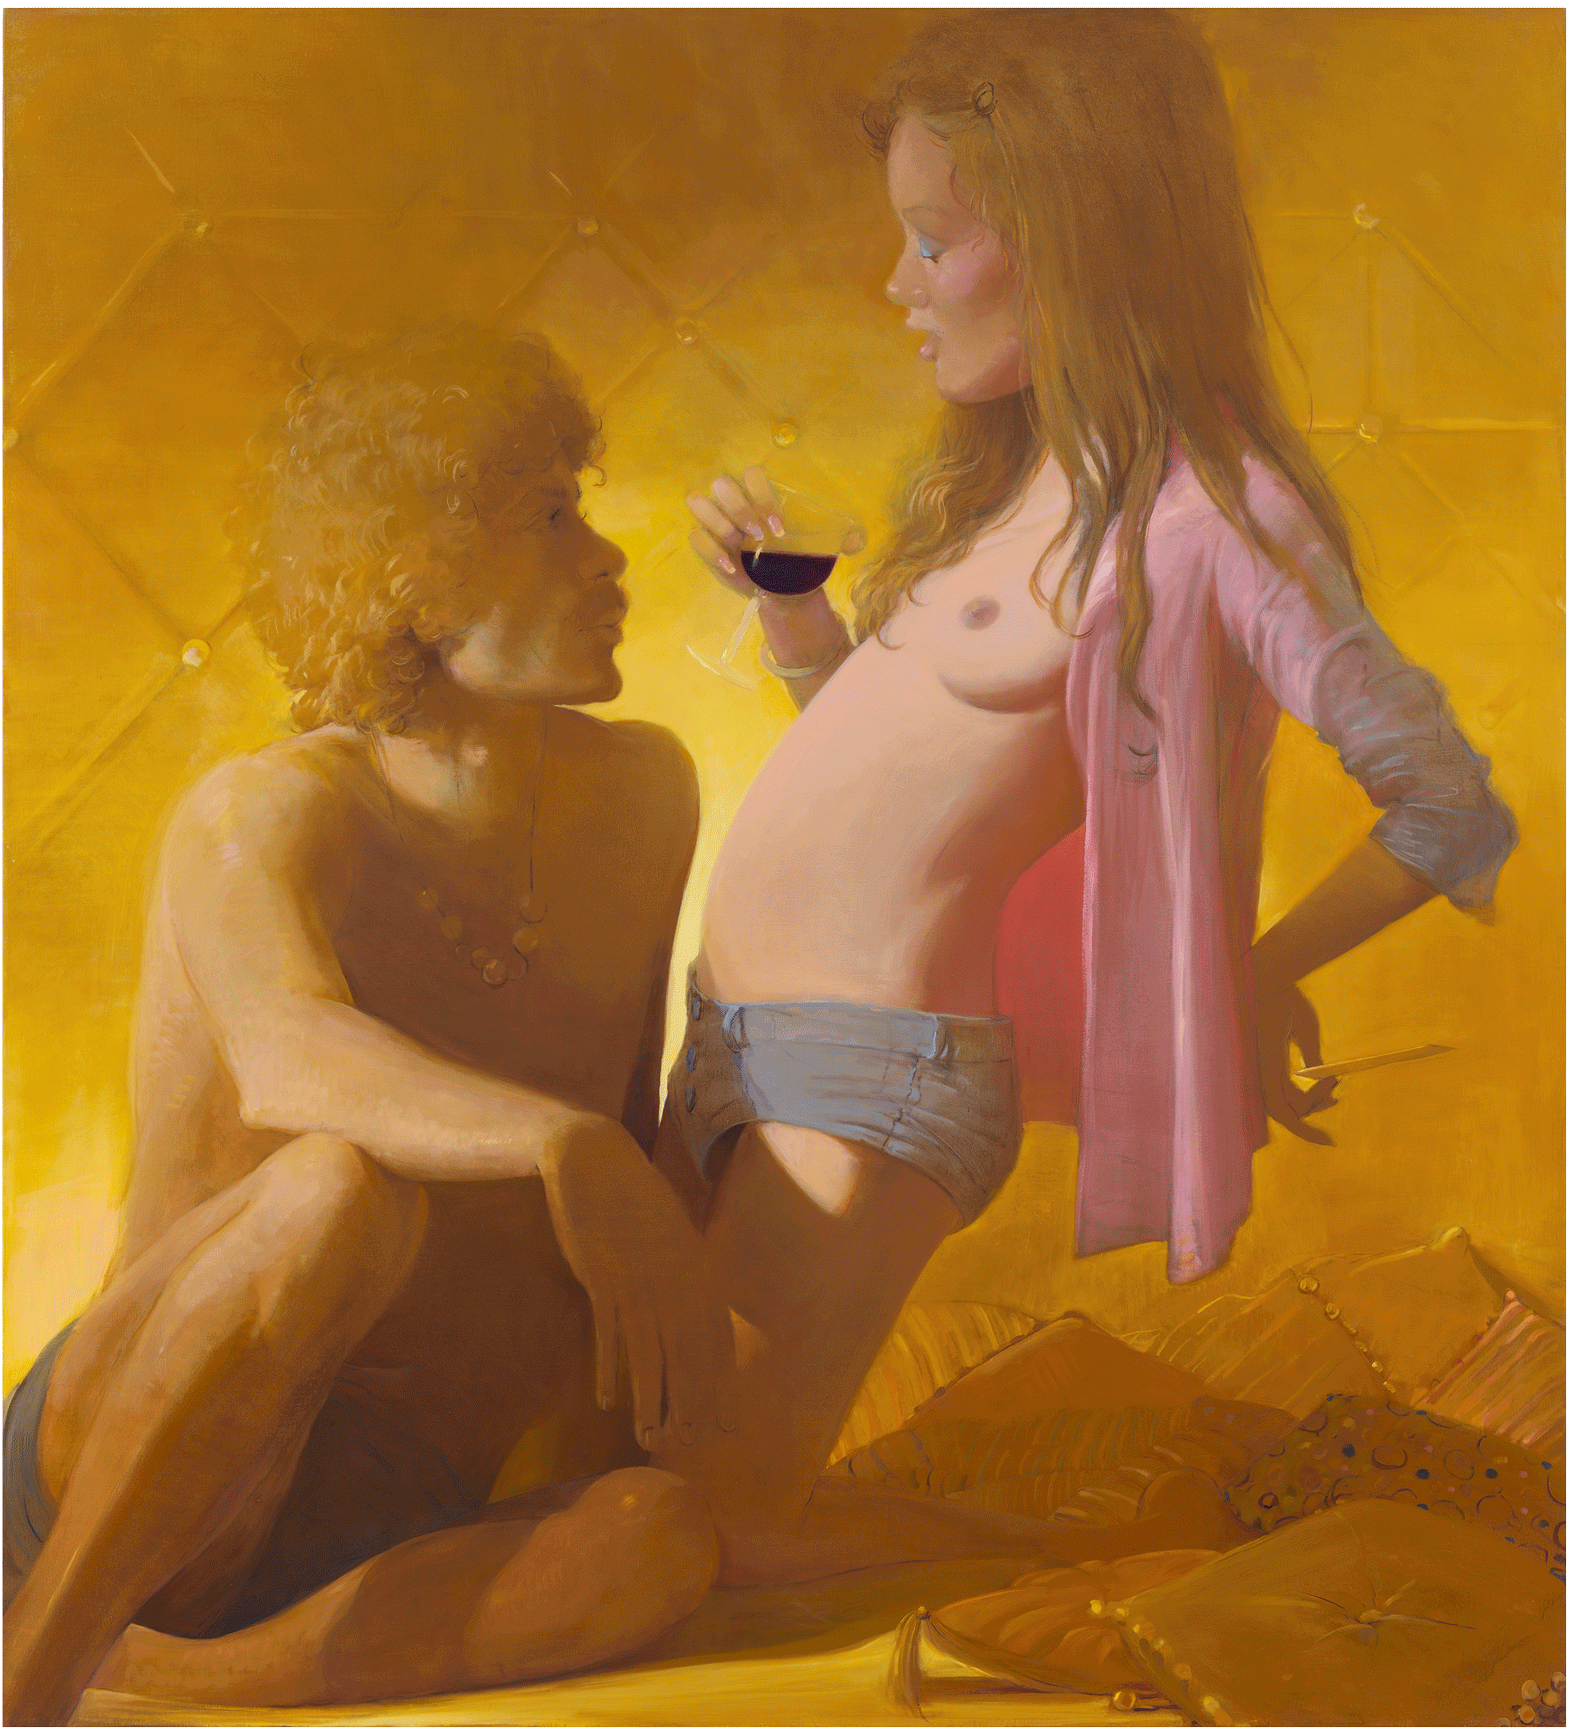 Lisa Yuskavage, Golden Couple, 2018, oil on linen, 77 1/8 x 70 inches (courtesy of David Zwirner Gallery)